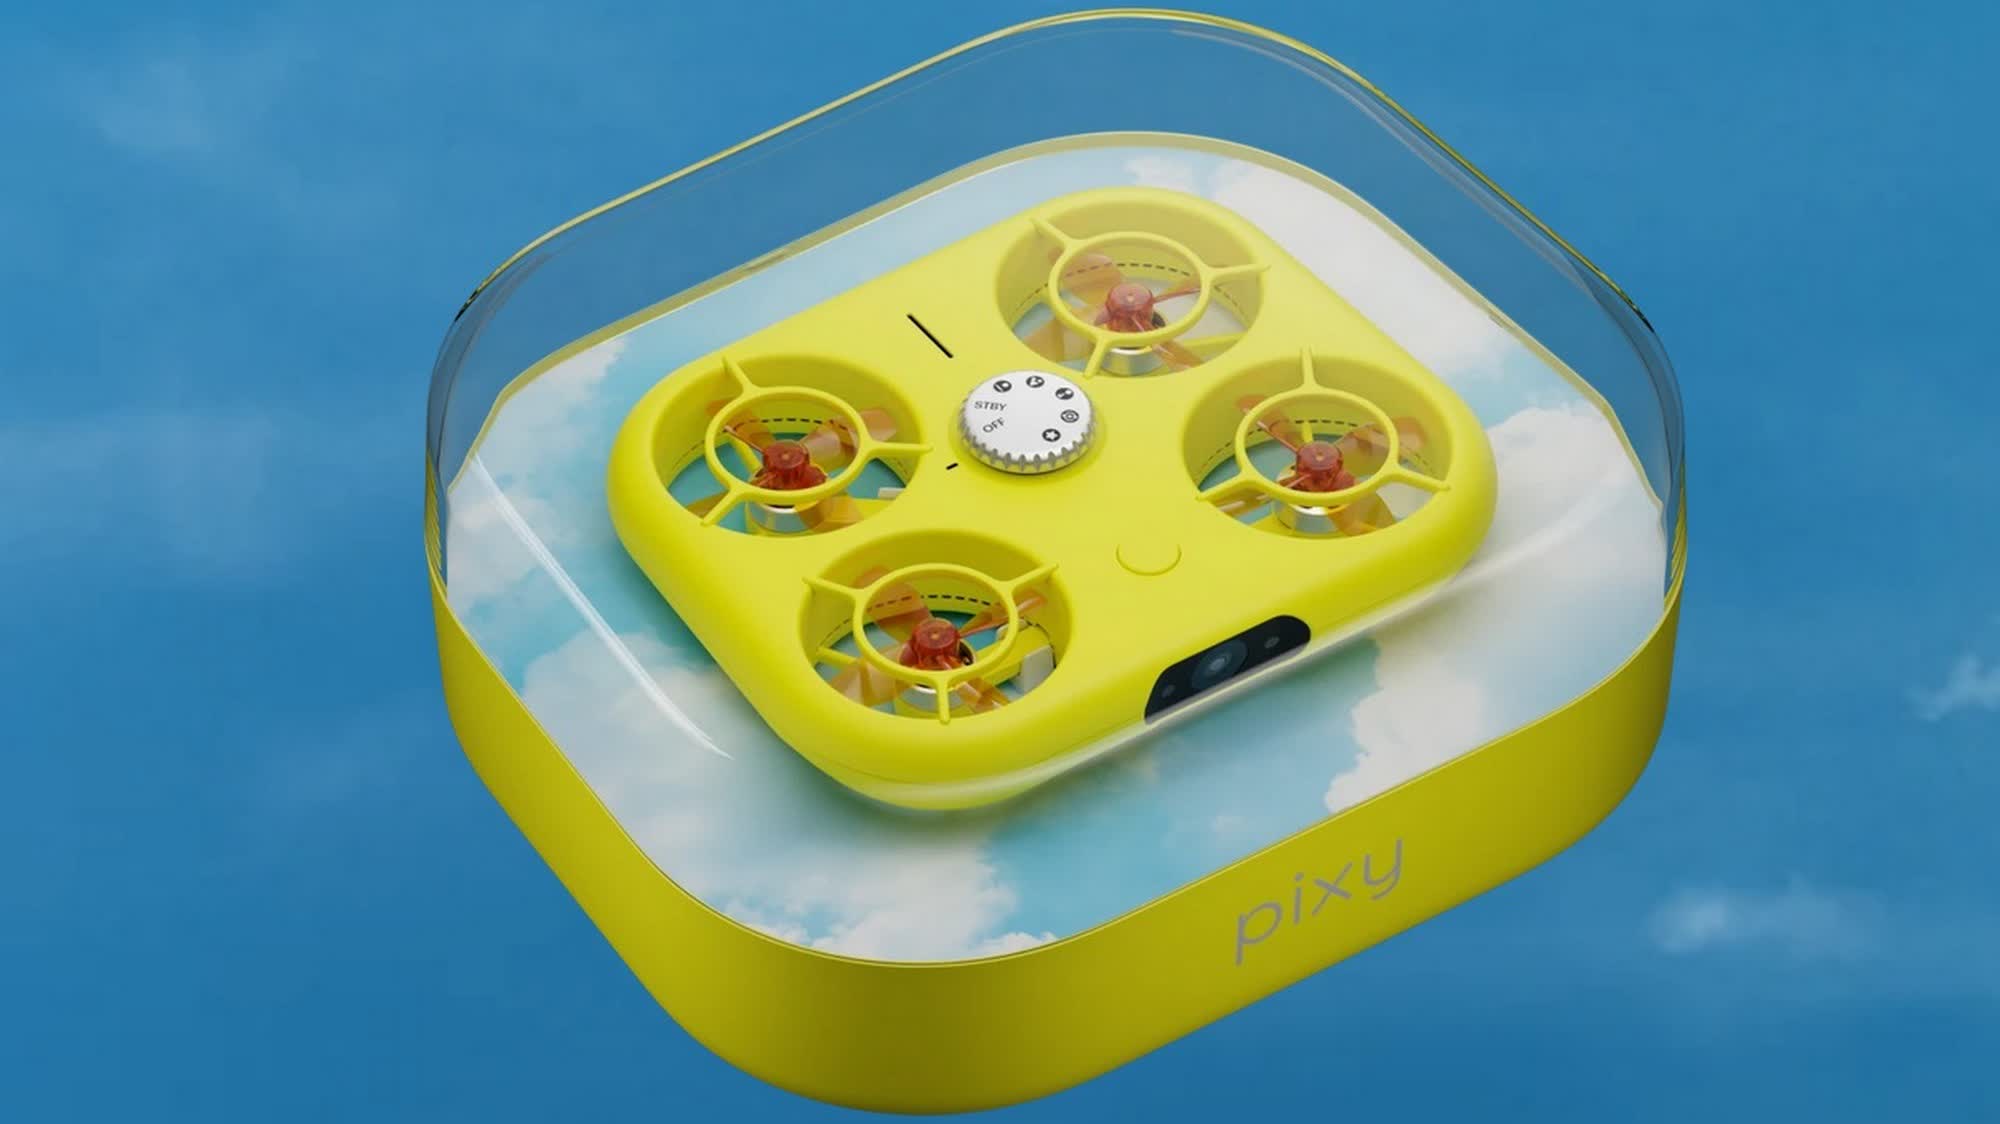 Snap recalls drones due to fire risk, offers refunds to all users